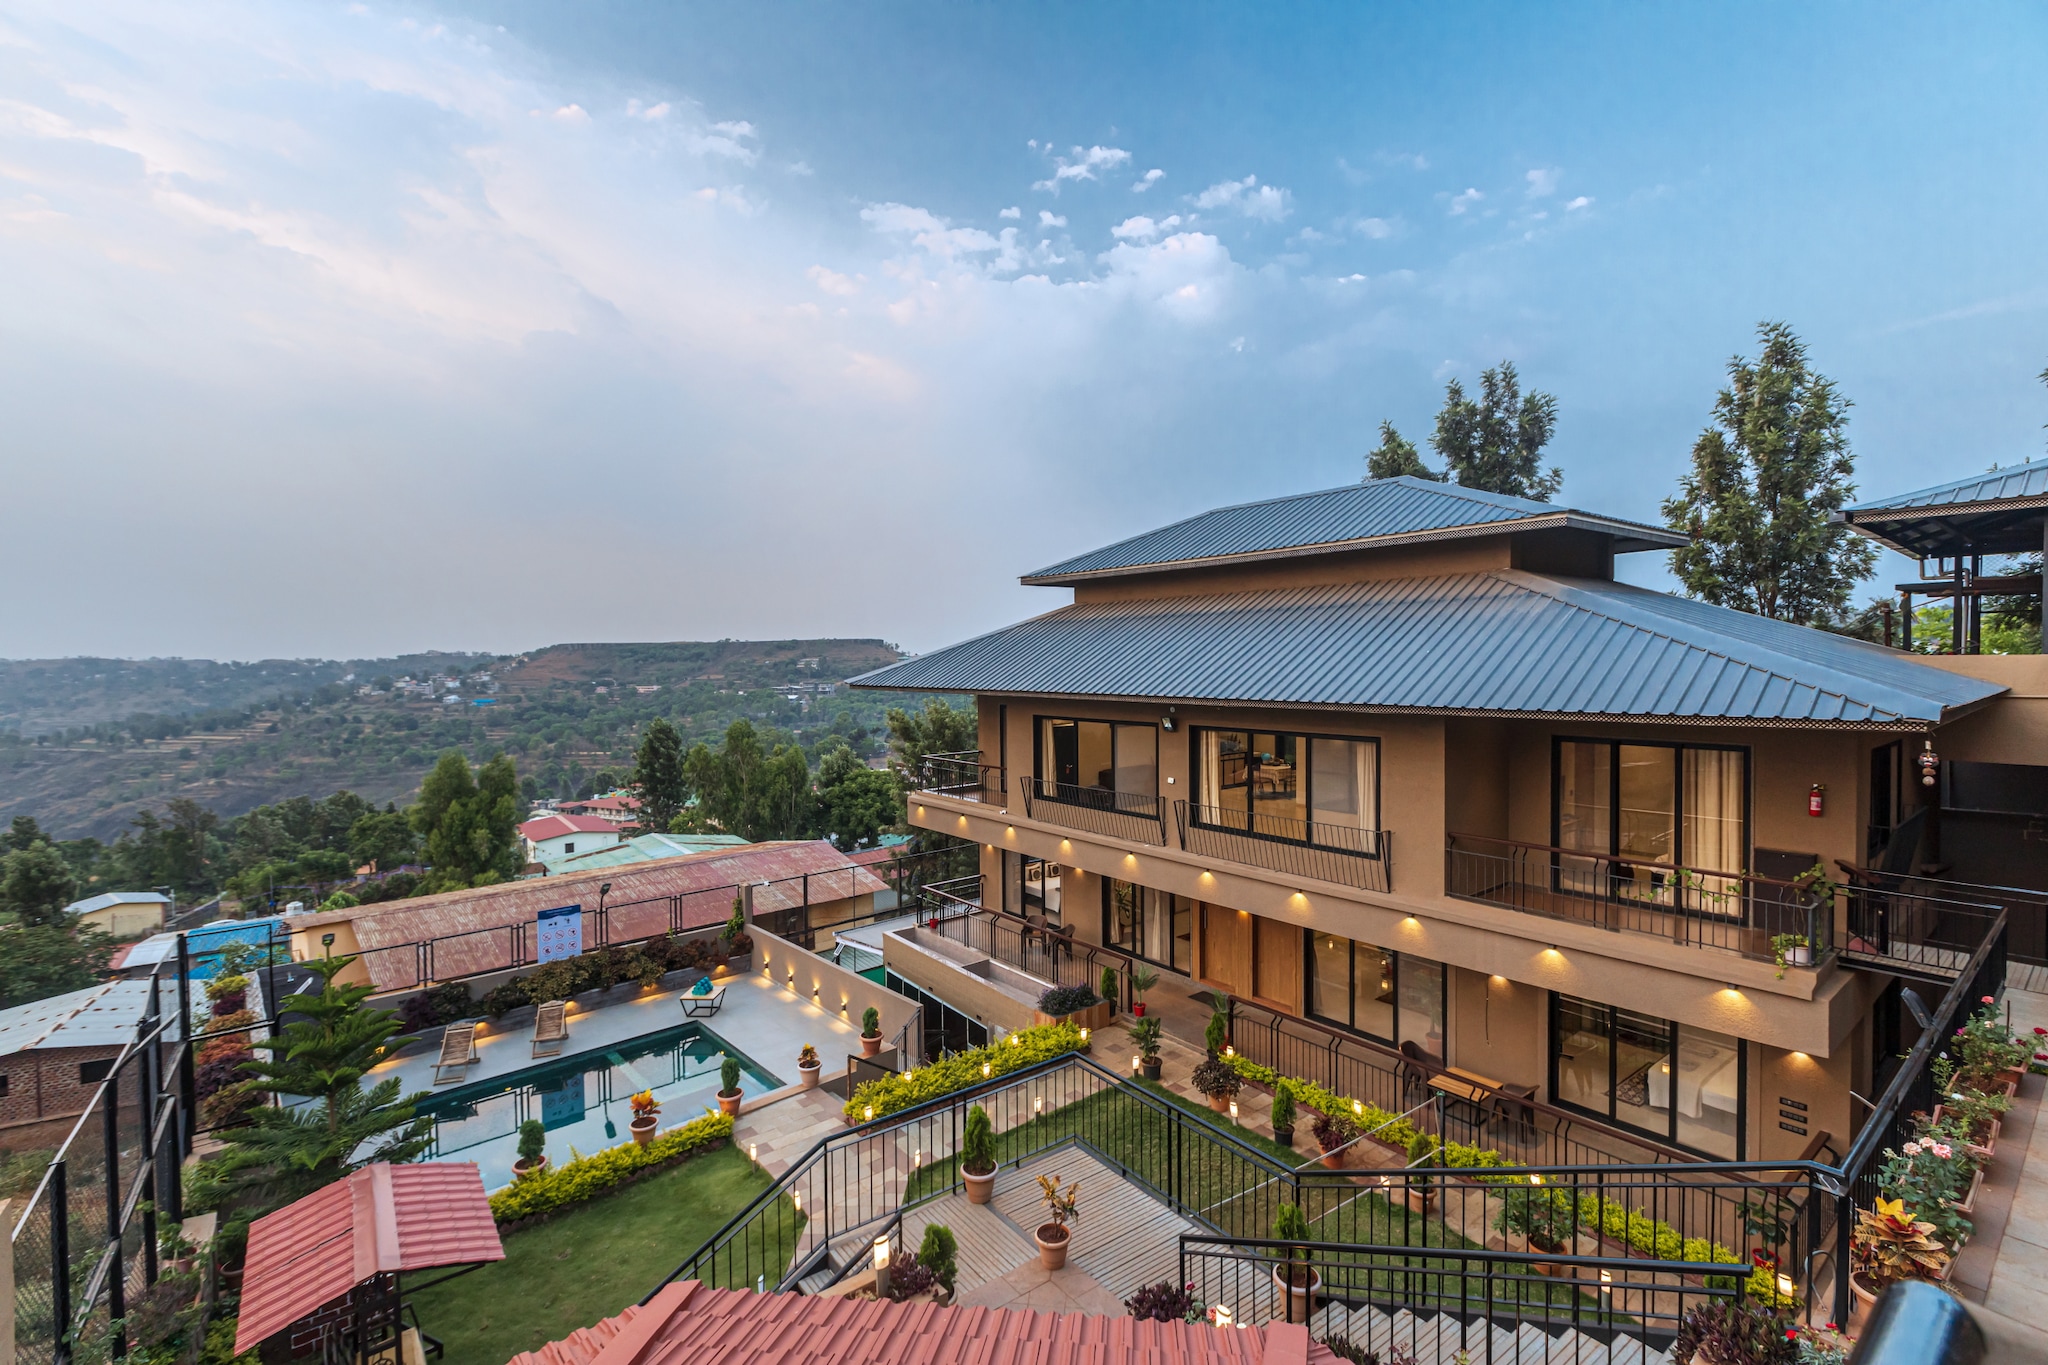 The villa offers incredible views of the mountain range, with mesmerizing sunrises. 